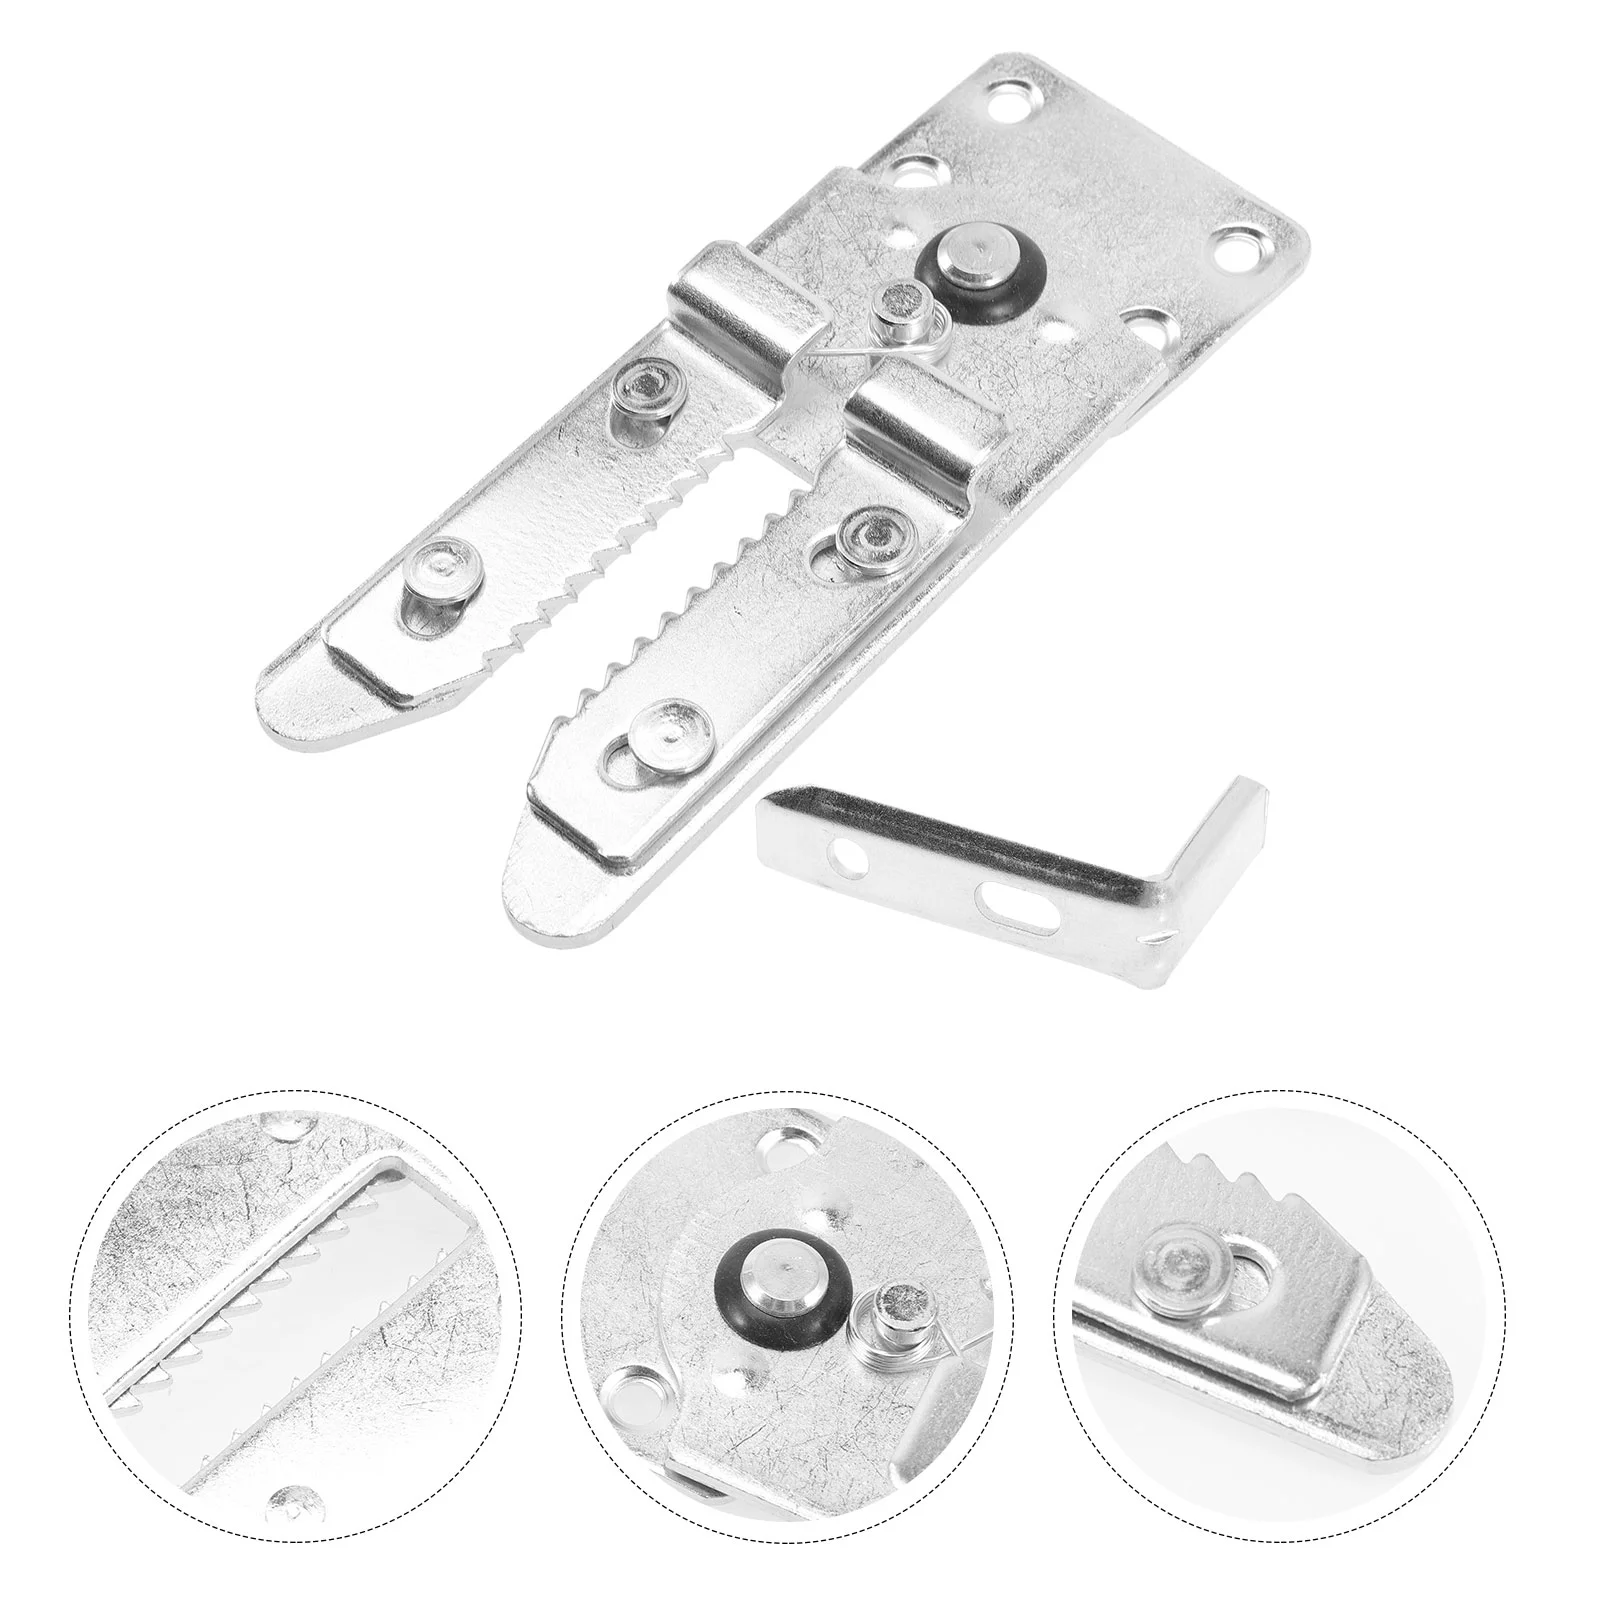 

Sofa Couch Connector Sectional Connectors Clips Bracket Interlocking Handle Door Internal Screws Connection Linker Connecting